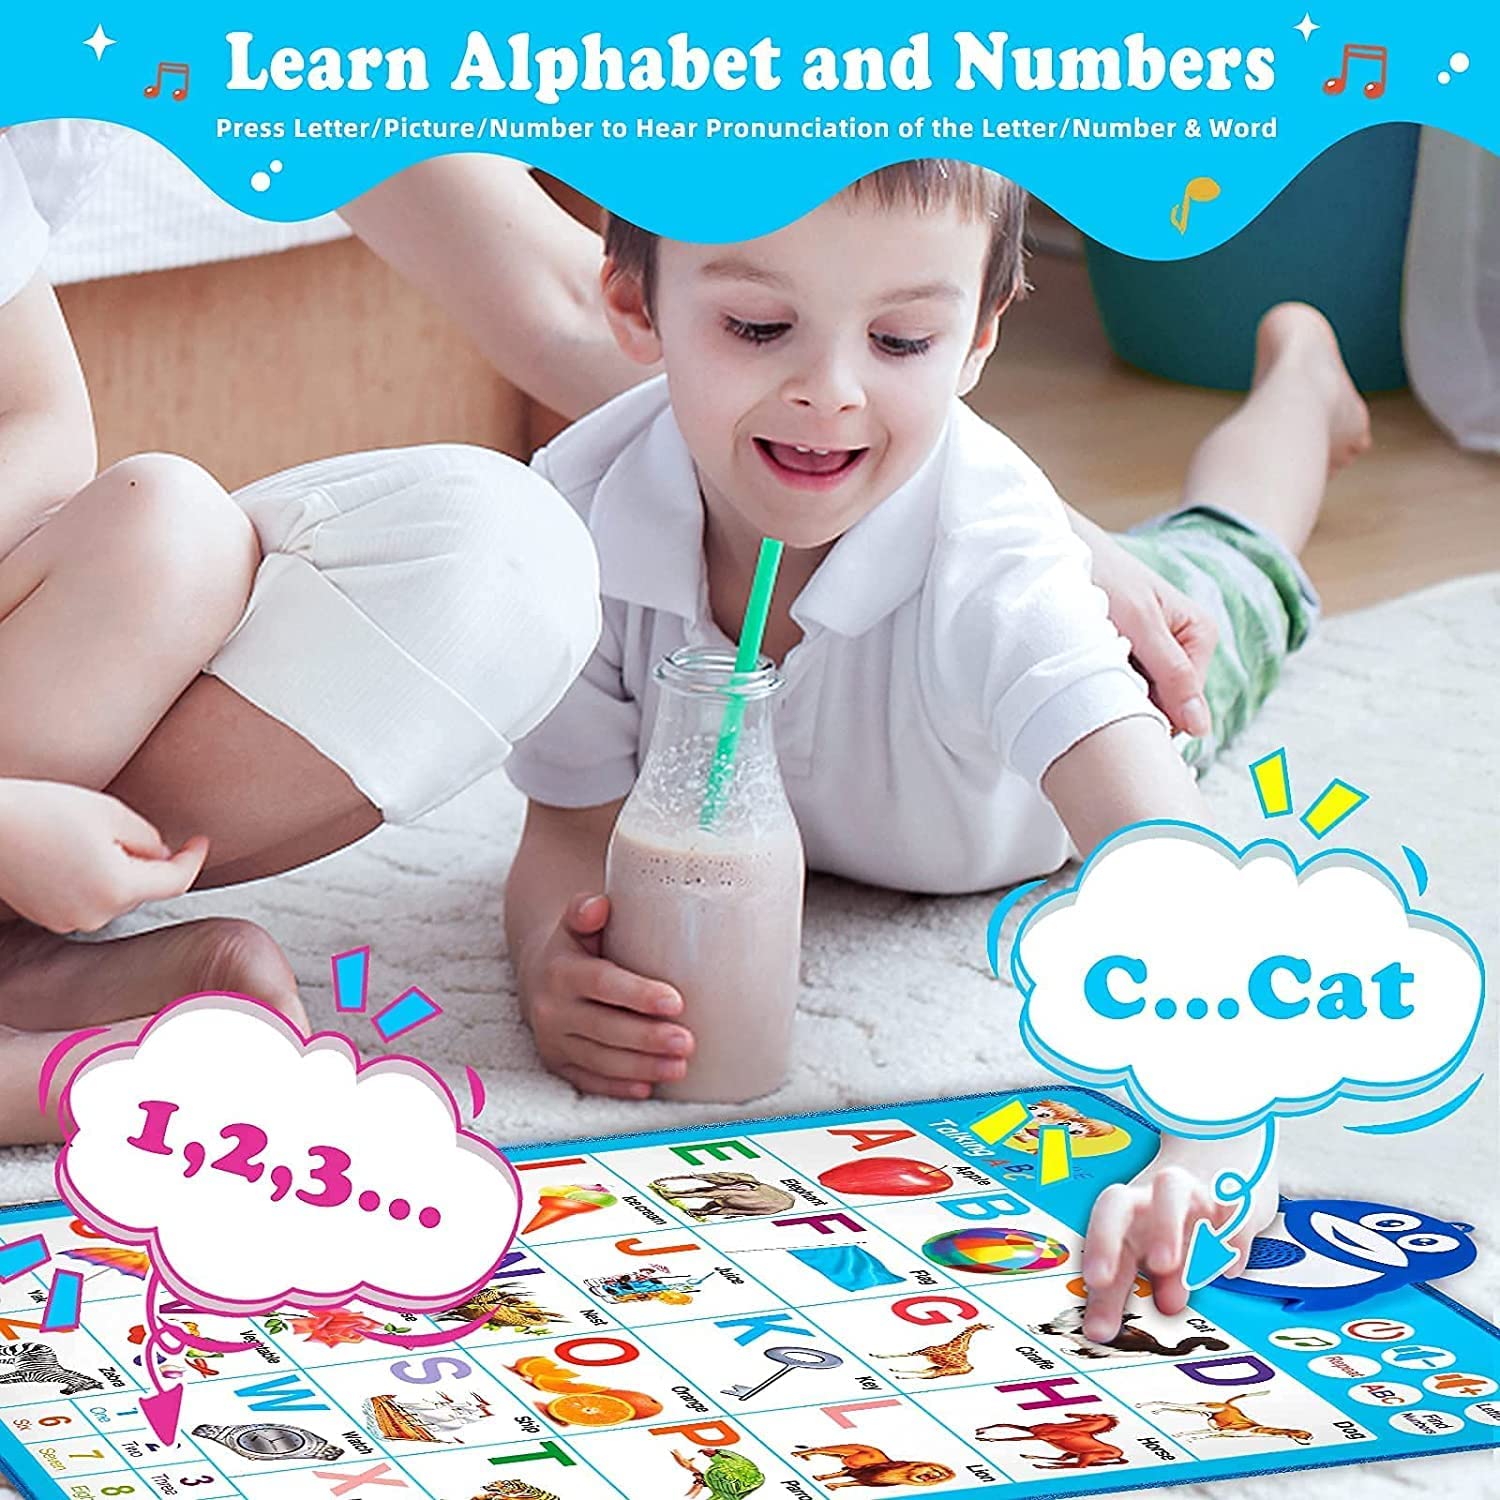 Alphabet Wall Posters - Play to Learn Preschool